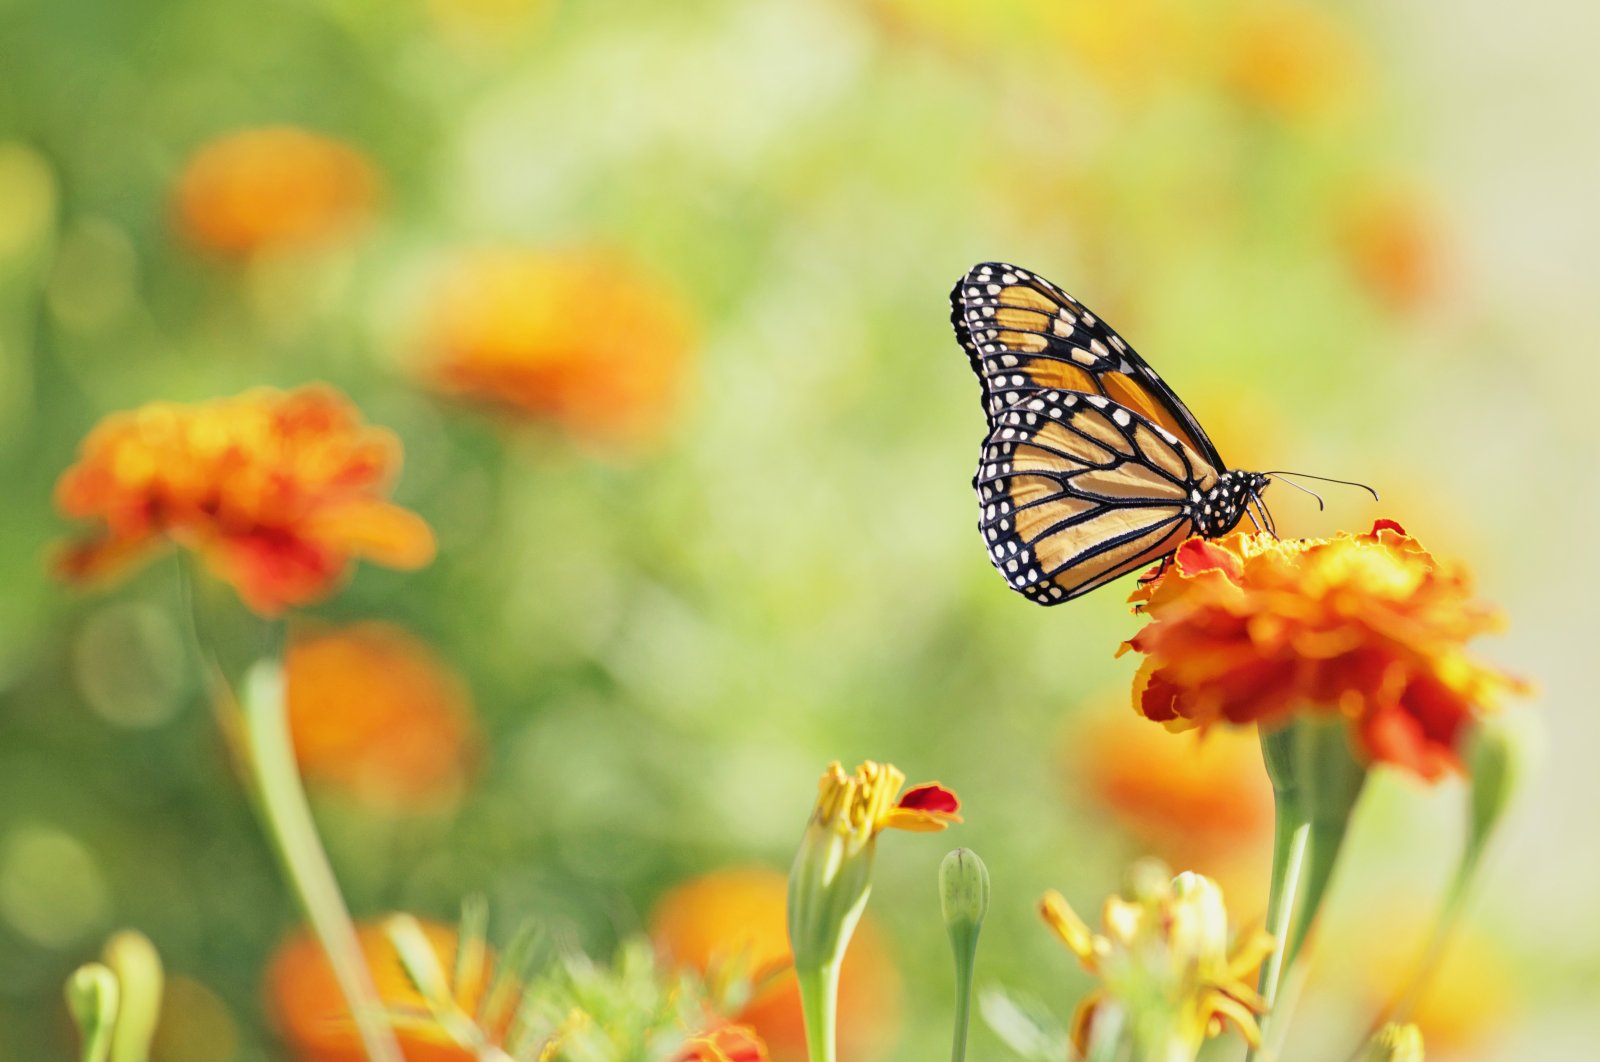 A monarch butterfly lands on a marigold, Aug. 22, 2015. (Getty Images)